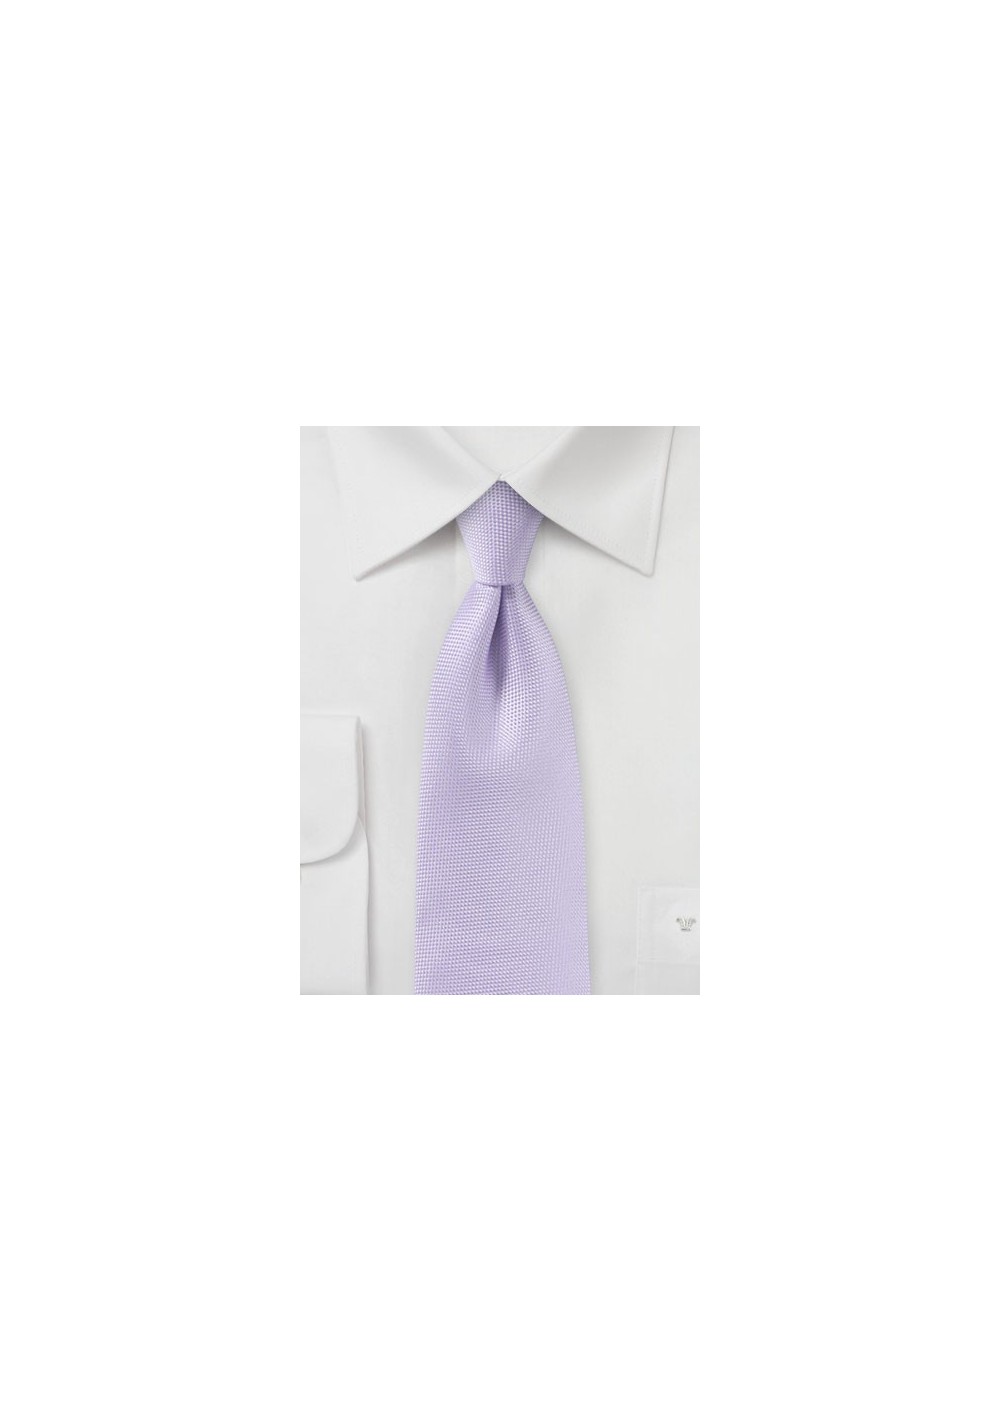 Microtexture Tie in Light Lavender